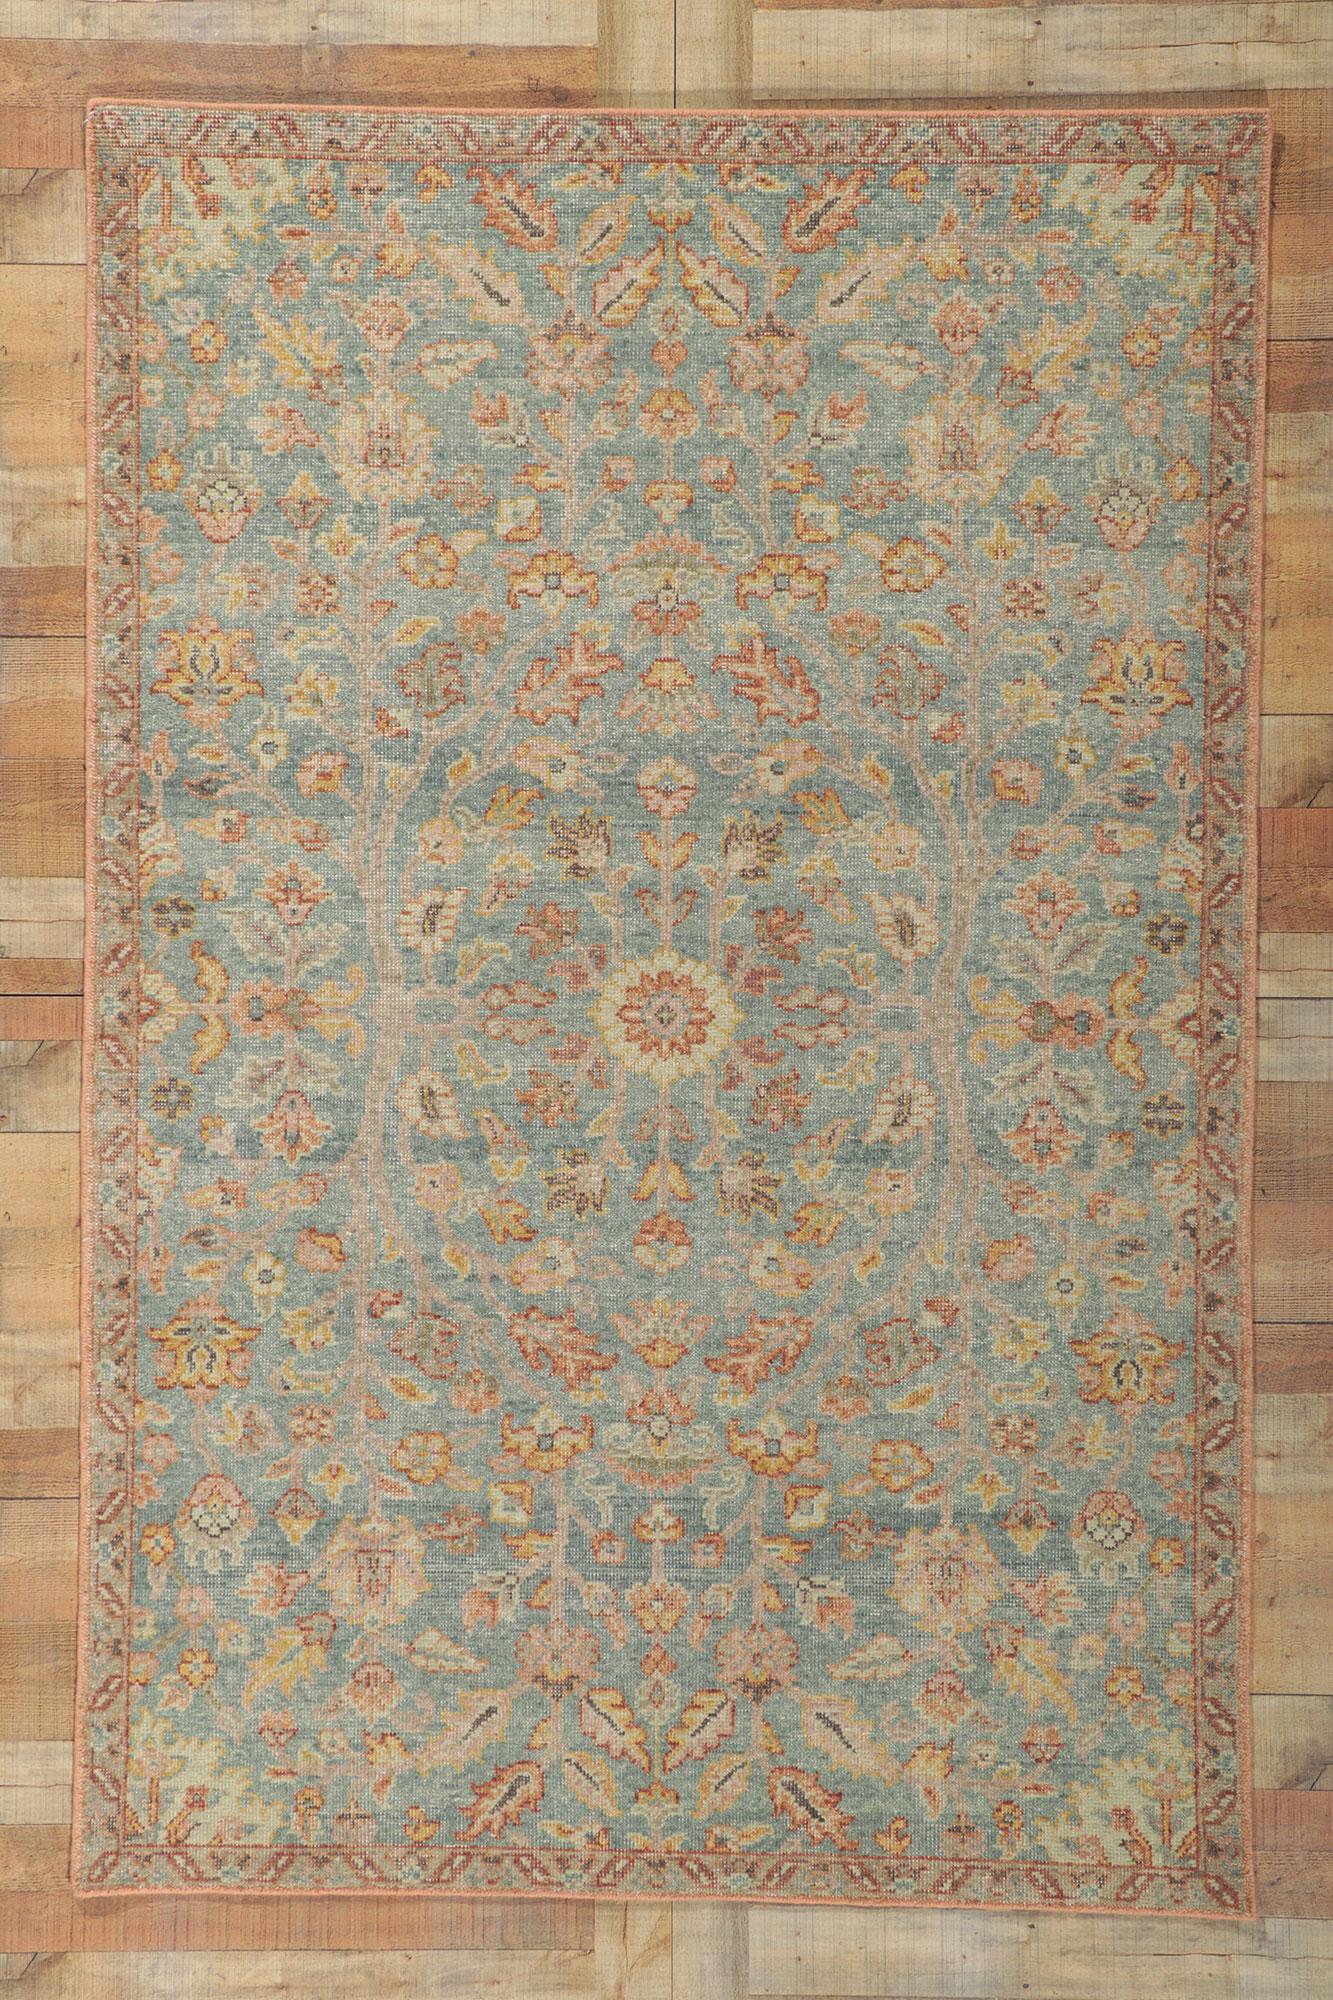 Contemporary New Vintage-Style Distressed Rug with Soft Earth-Tone Colors For Sale